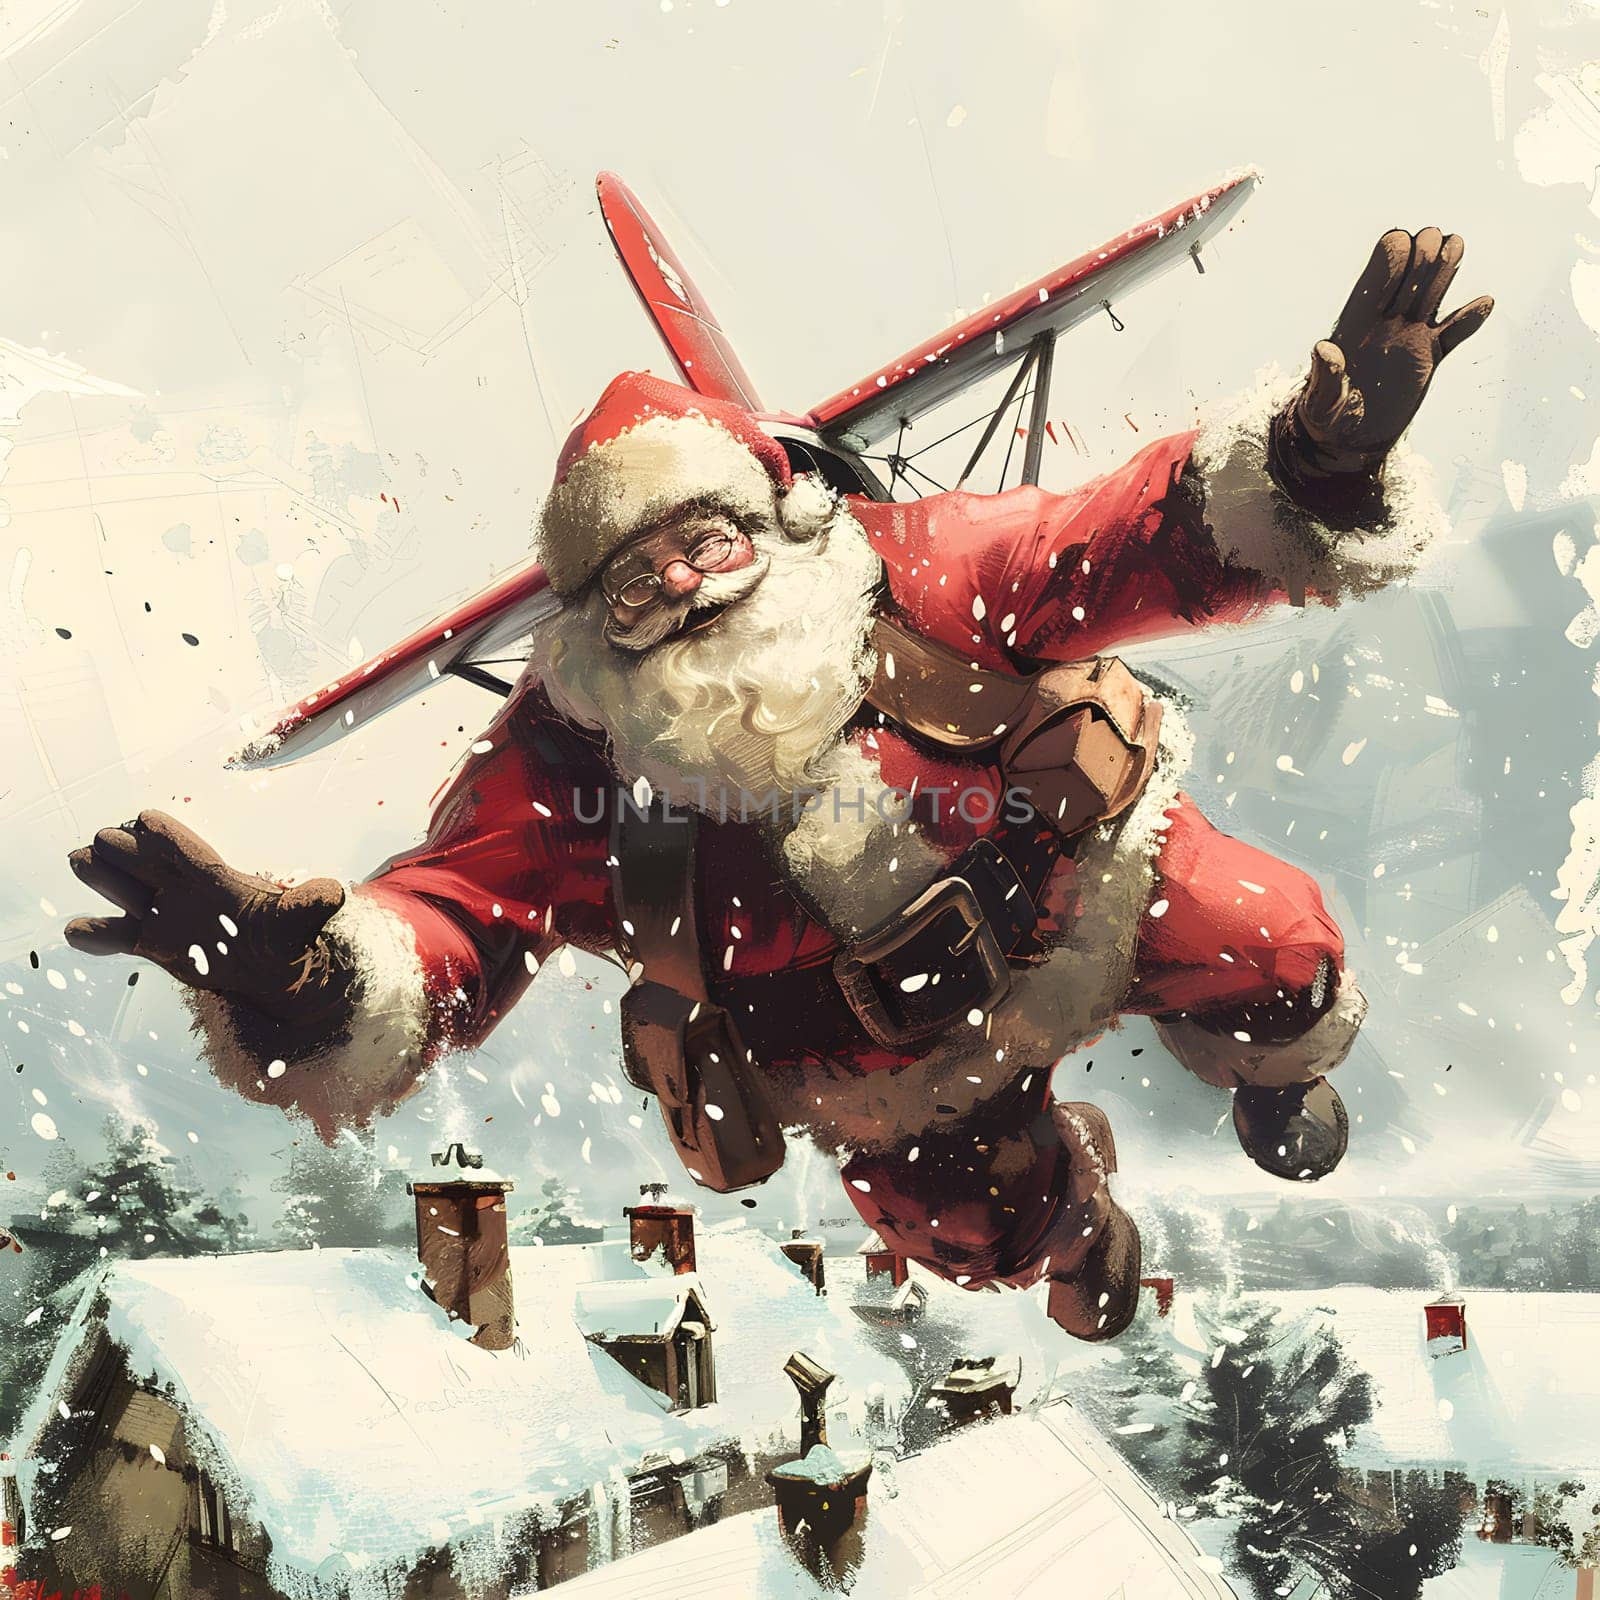 a painting of santa claus flying through the air by Nadtochiy